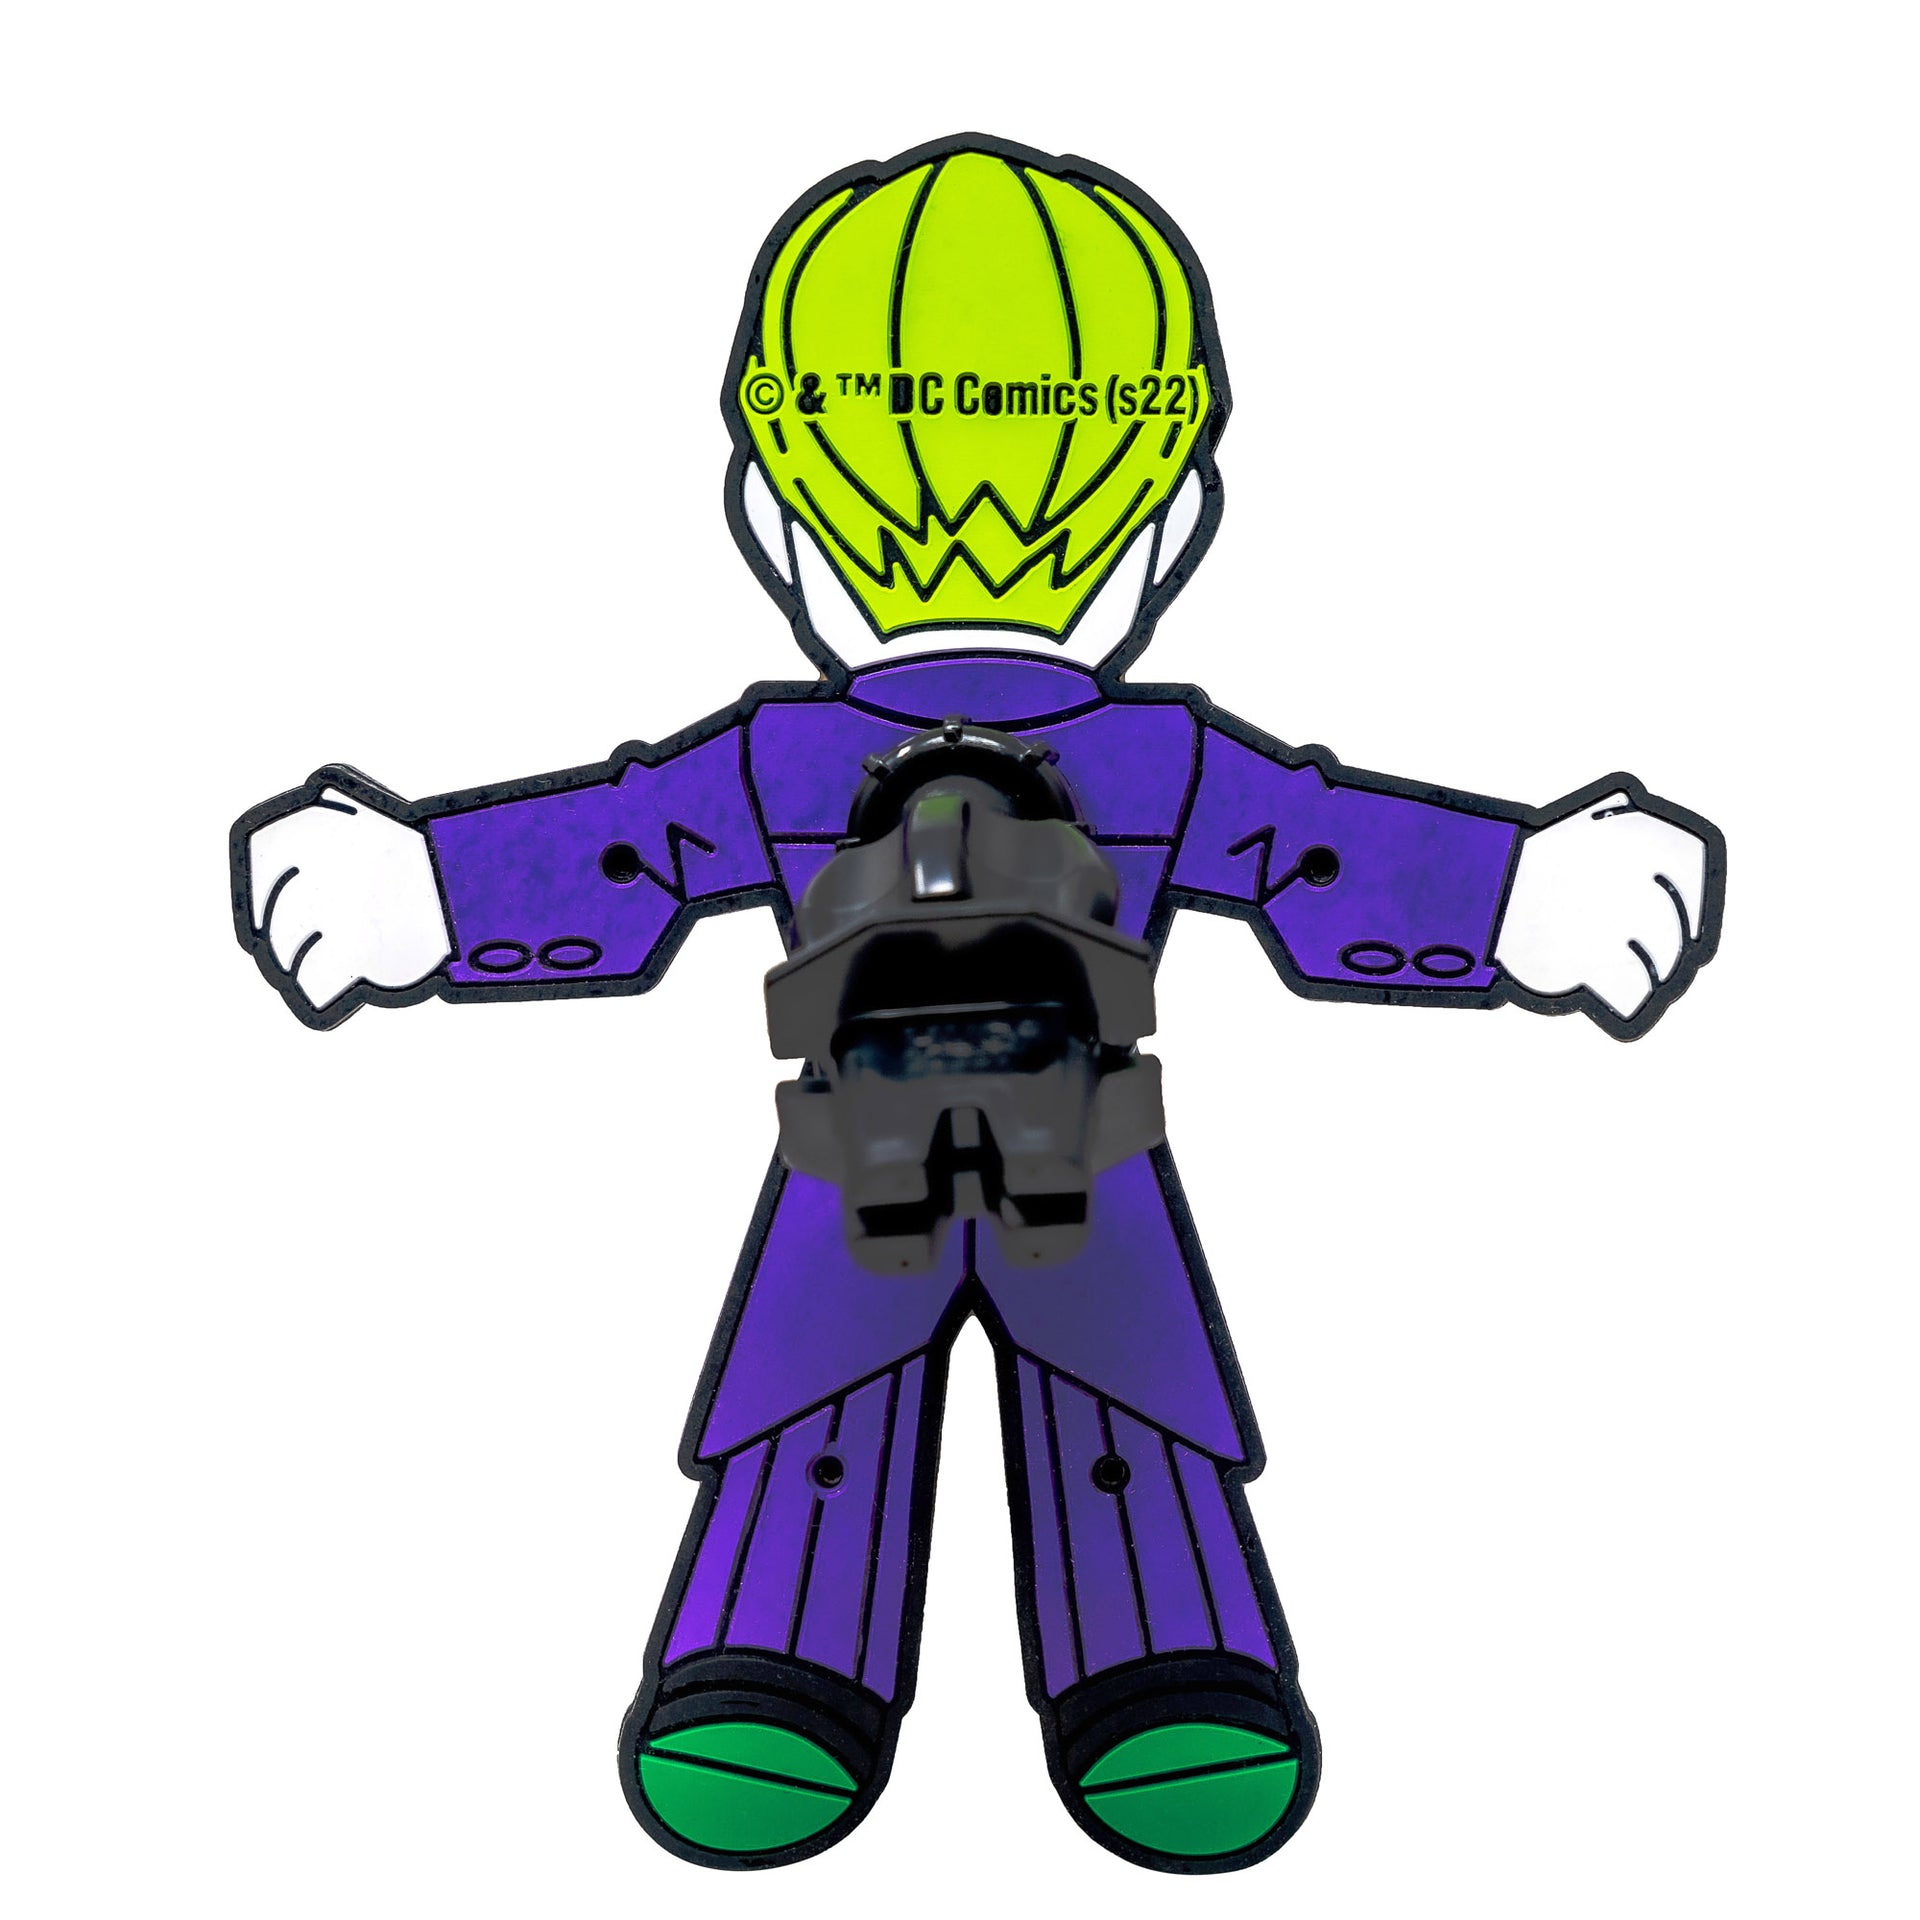 Image of DC Comics The Joker Hug Buddy showing the back of the figure and its vent clip on a white background